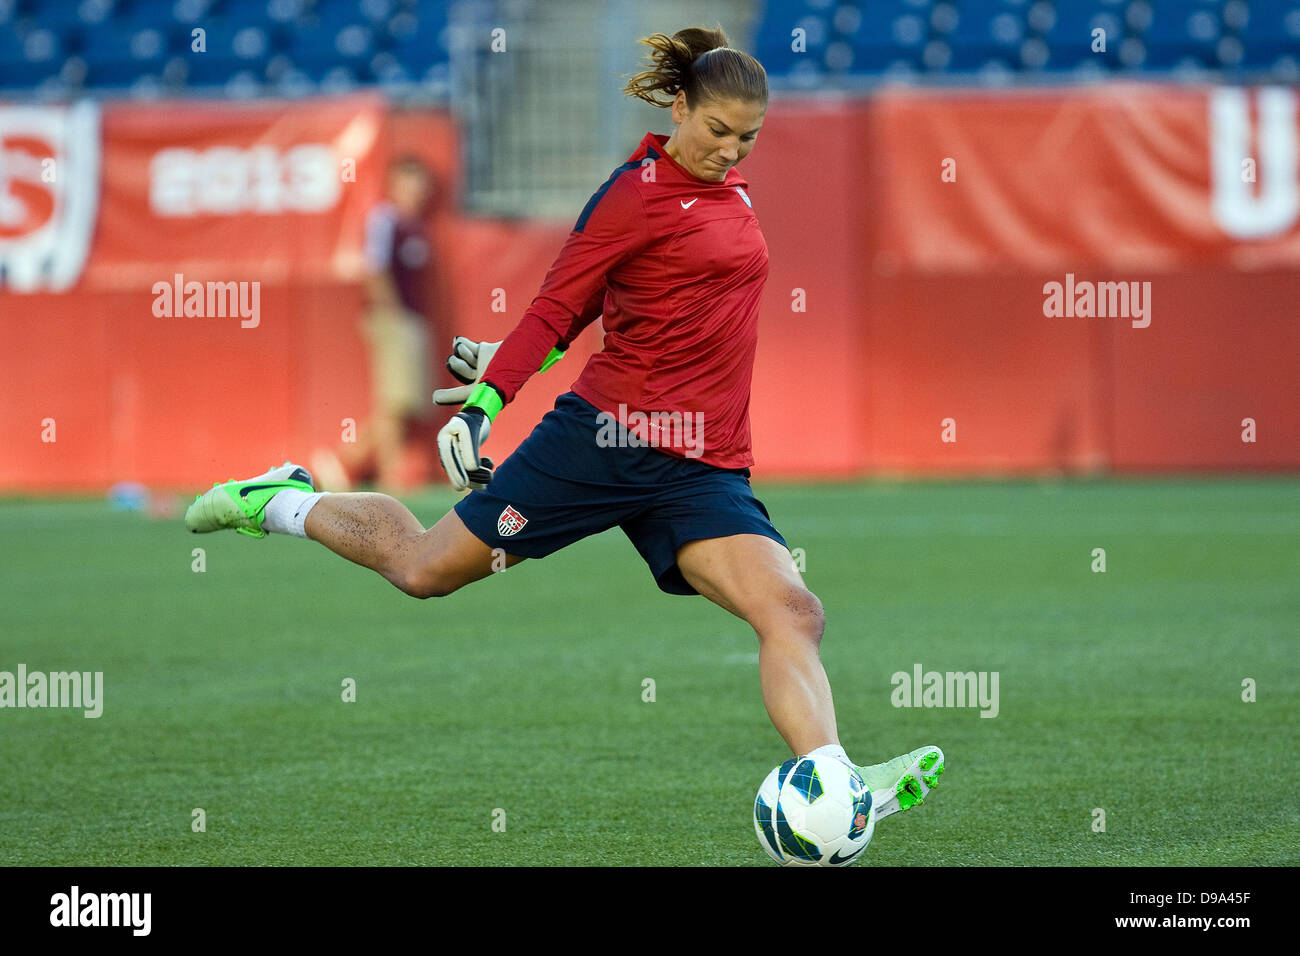 Foxborough, Massachusetts, United States. 15th June, 2013. USA goalkeeper Hope Solo (1) warming up prior to the international friendly soccer match between the USA Women's National Team and Korea Republic Women's Team at Gillette Stadium in Foxborough, Massachusetts. USA defeated Korea 4-1. Anthony Nesmith/CSM Credit: csm/Alamy Live News Stock Photo